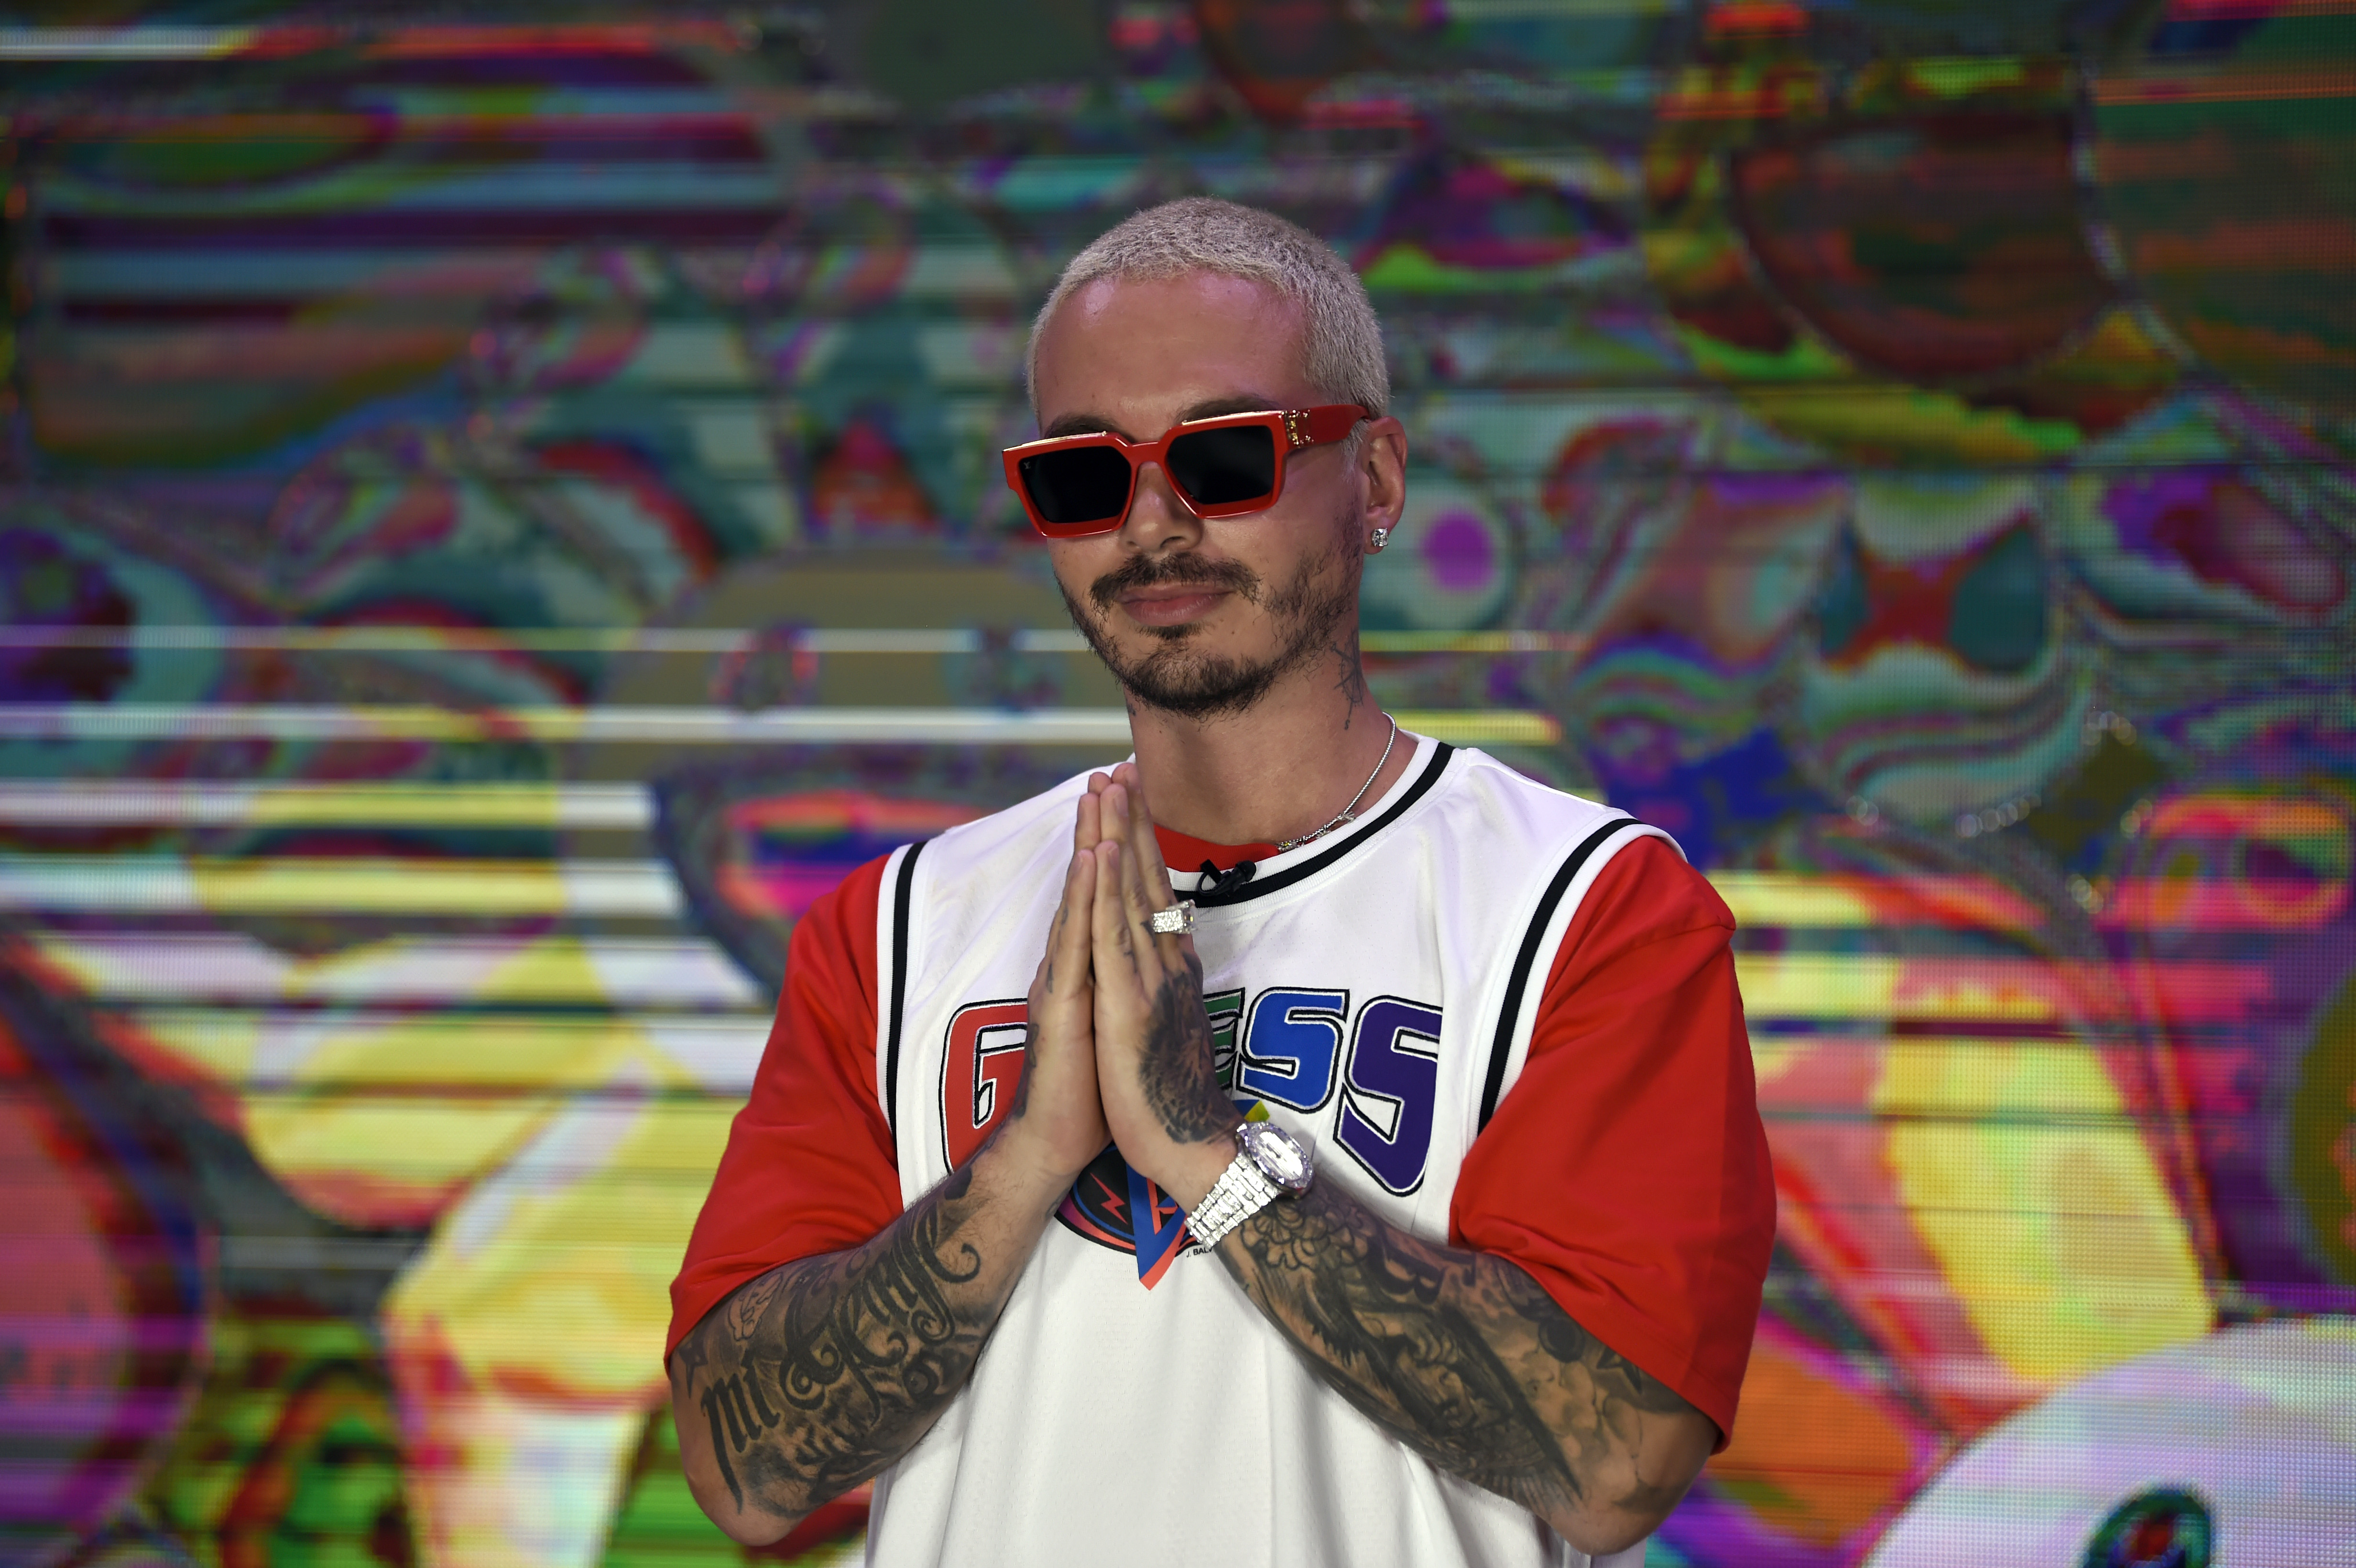 The Grammys Don't Value Us: J Balvin Posts Cryptic Tweet